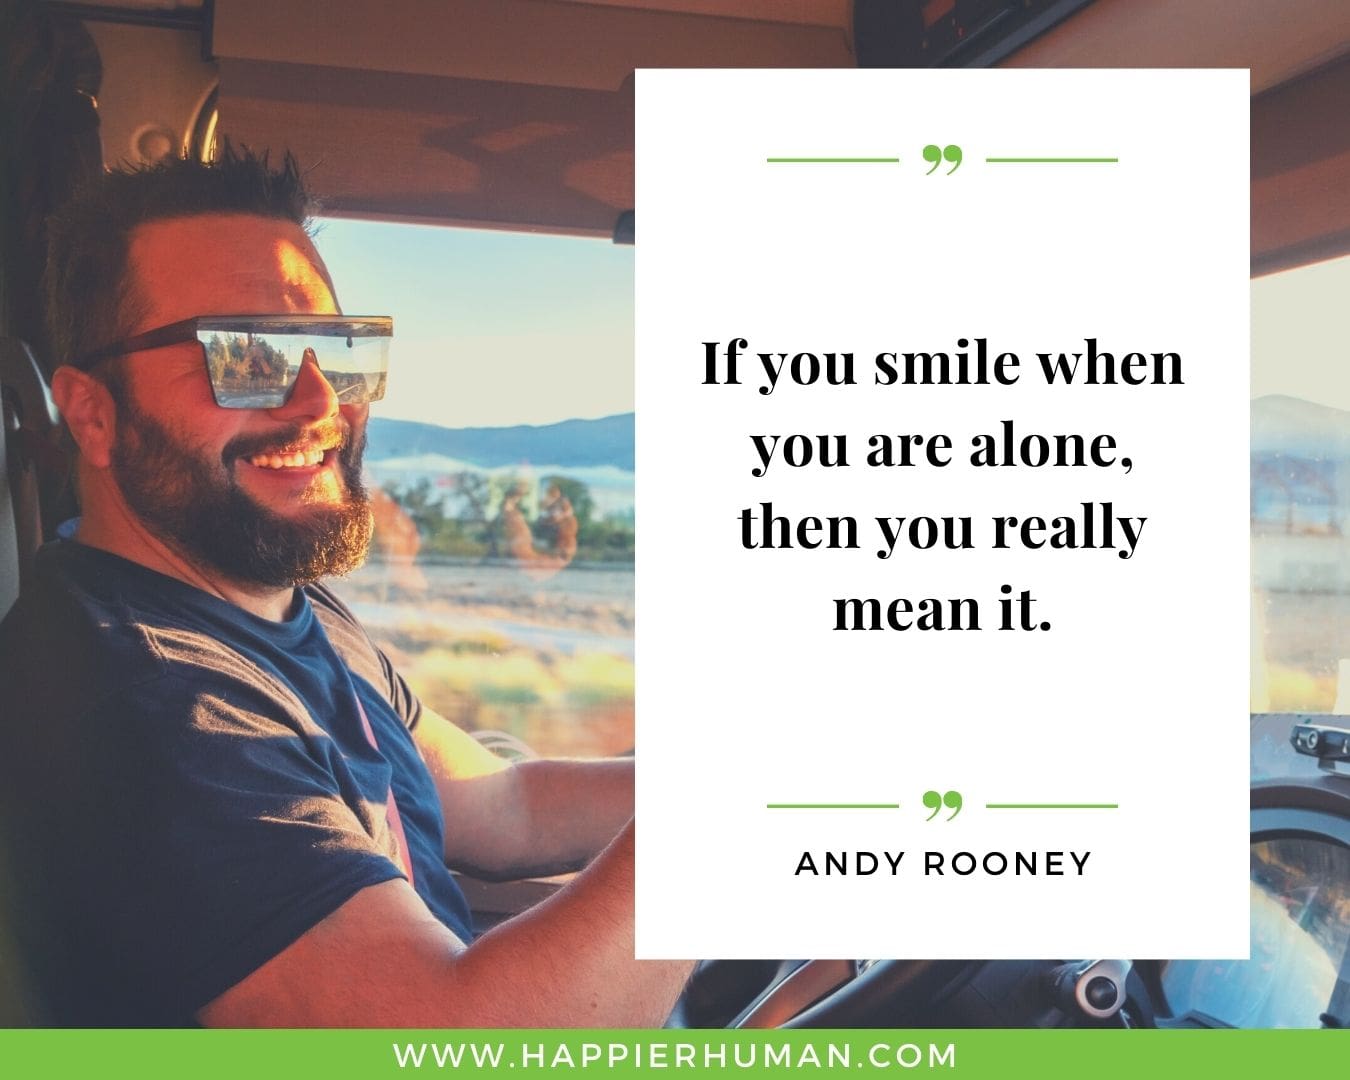 Loneliness Quotes - “If you smile when you are alone, then you really mean it.”– Andy Rooney